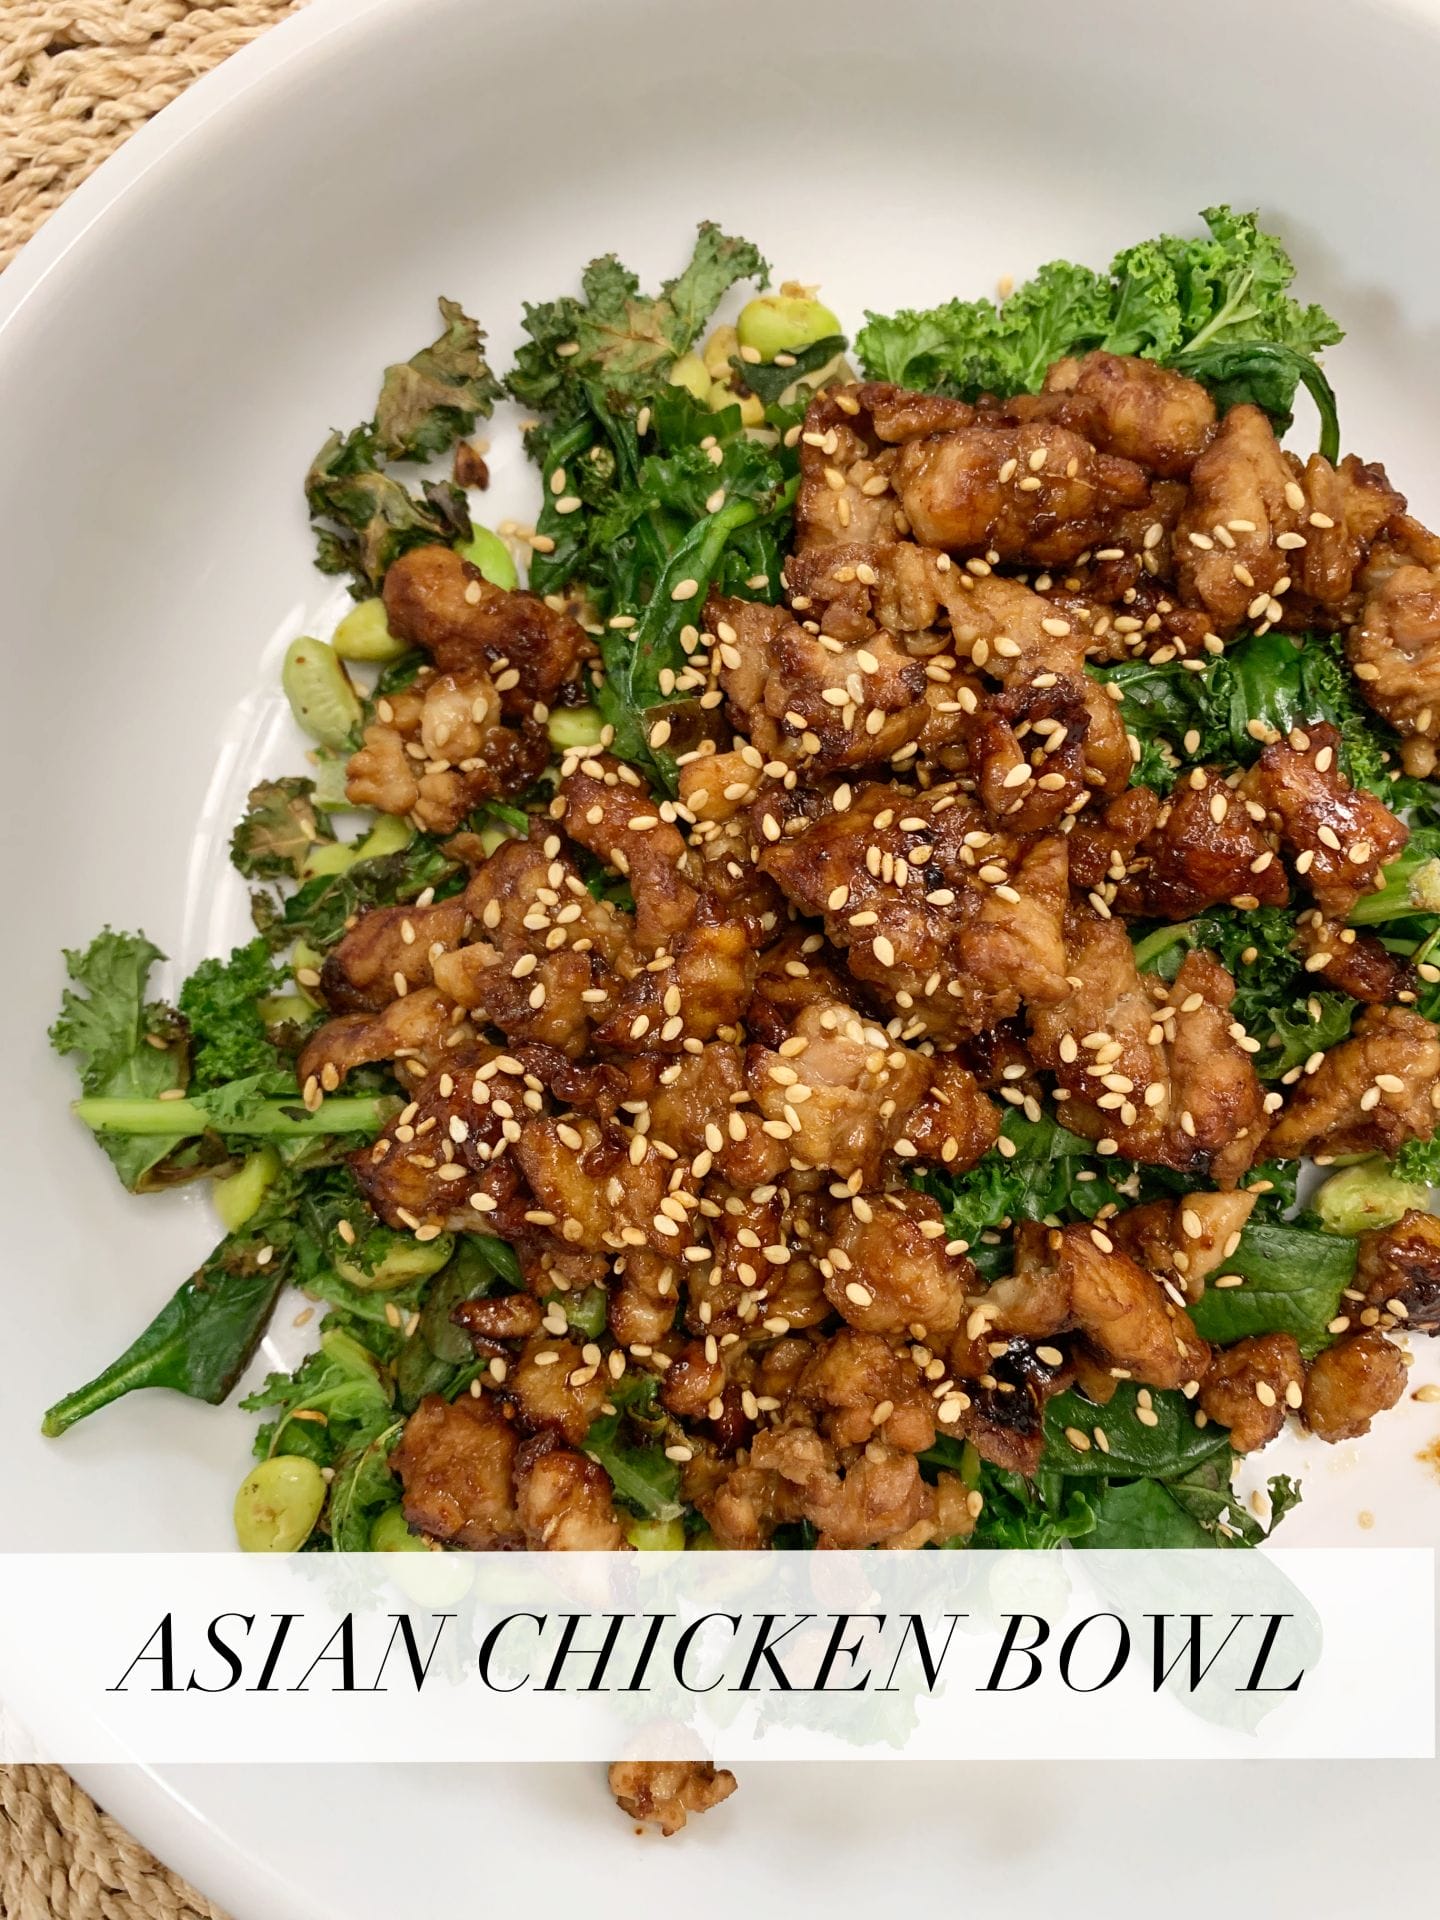 Asian Chicken Bowl | from Get Fit Done Workout and Lifestyle Guide 